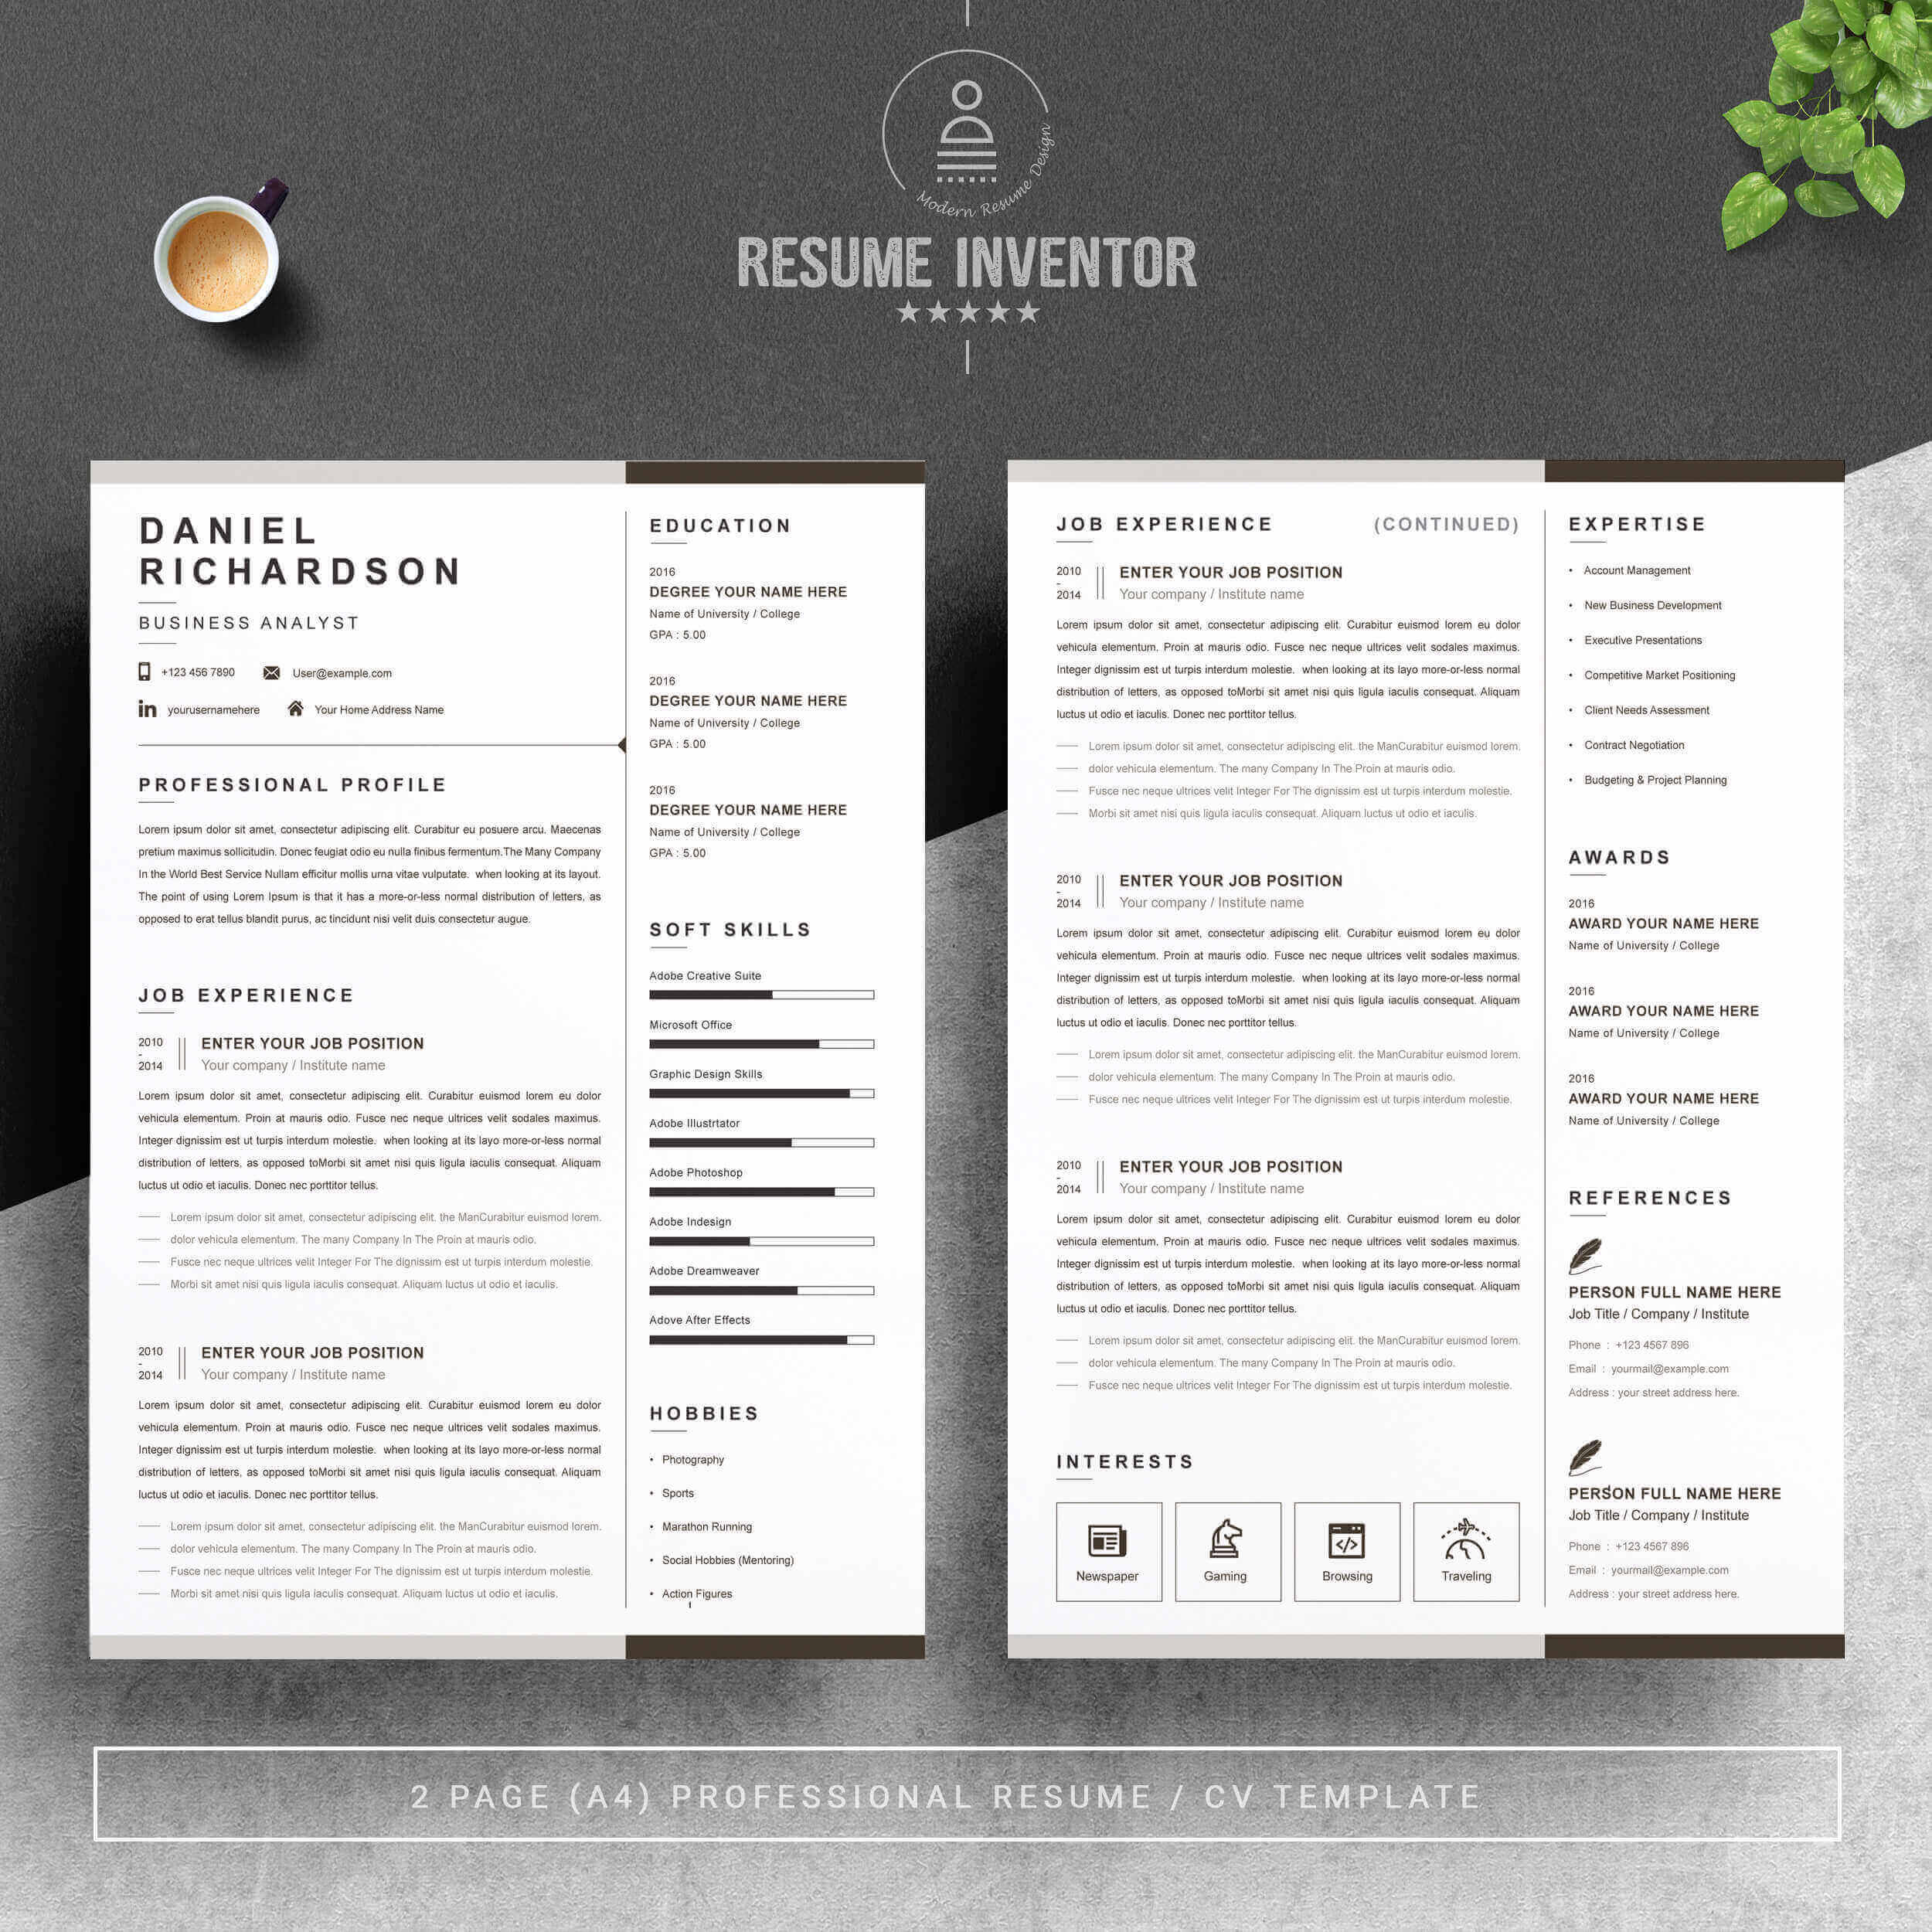 Business Analyst Resume Design Template | Modern Word Resume Template preview image.